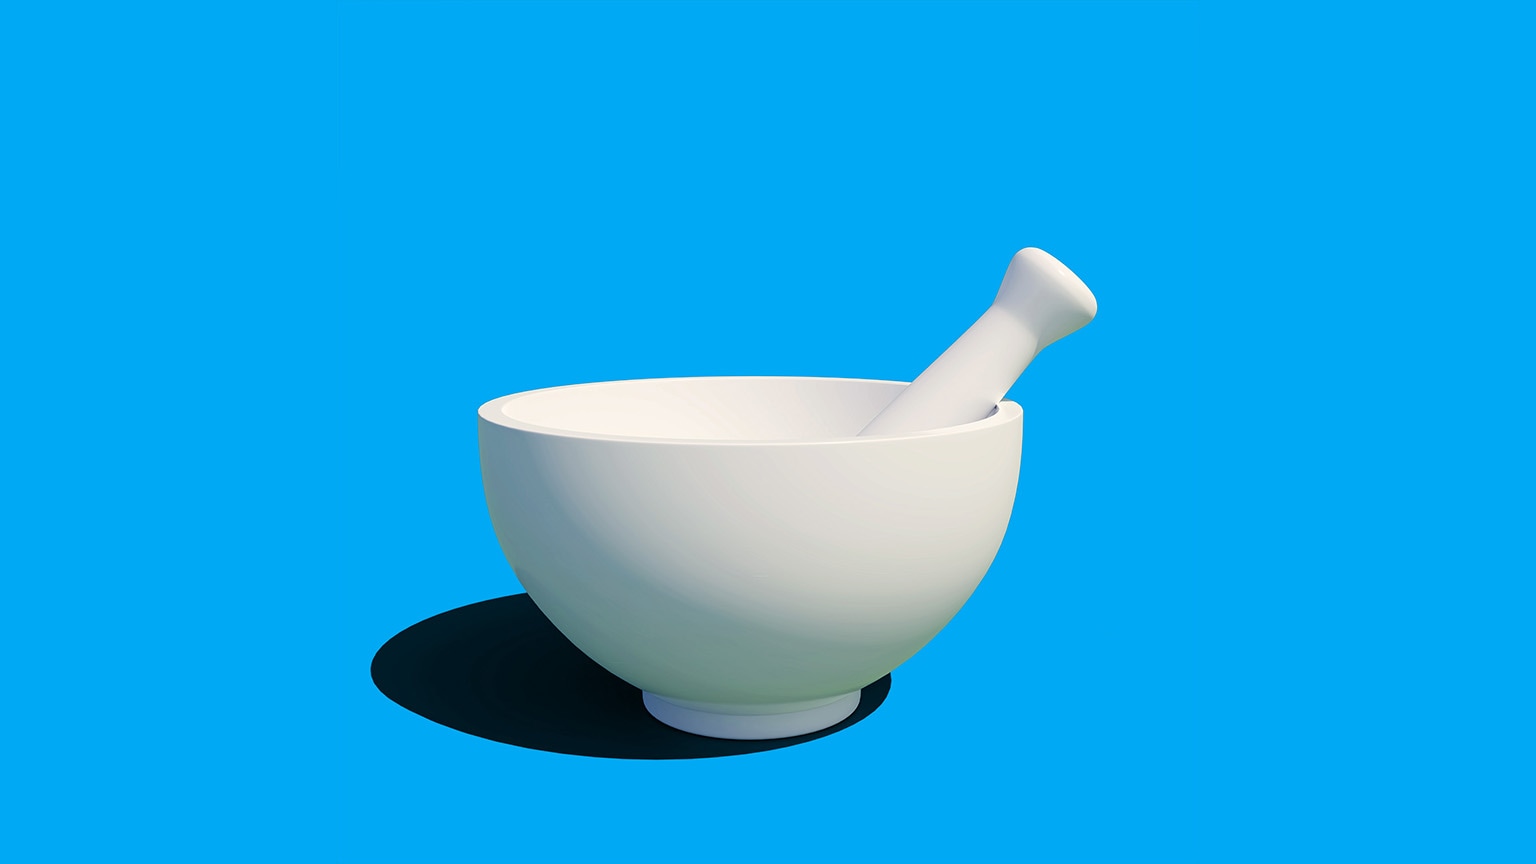 White stone mortar and pestle with a dramatic shadow on a vibrant blue background.